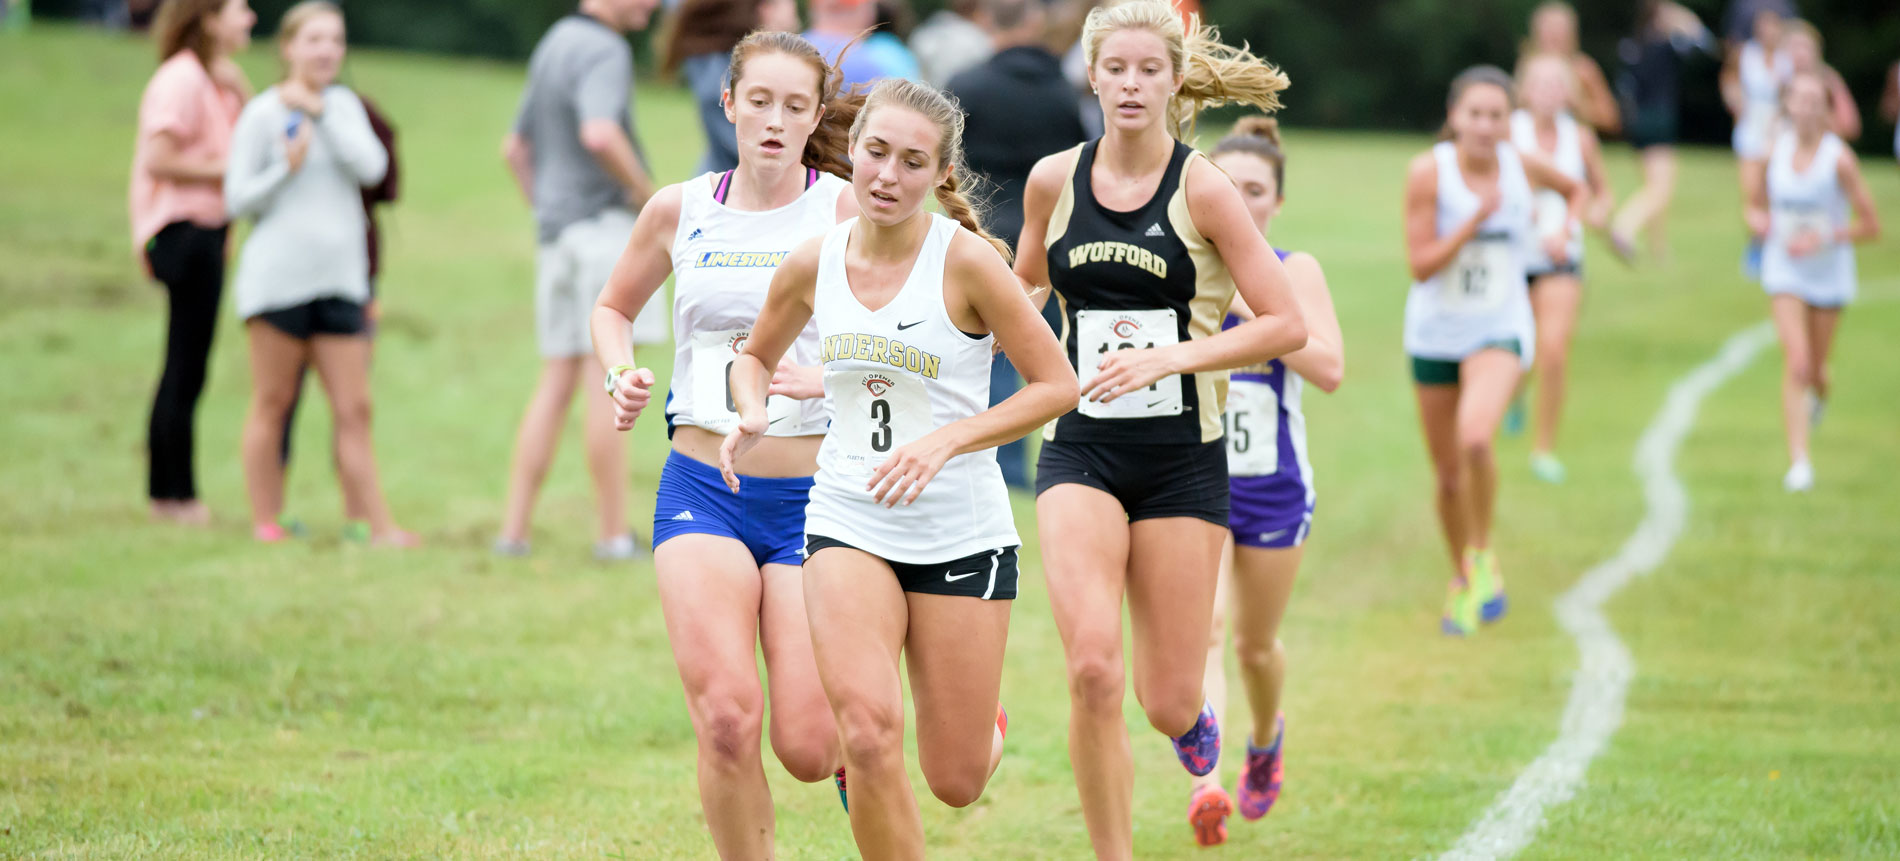 Women’s Cross Country Finishes Second at USC Upstate’s Eye Opener; Trio Competes on the Men’s Side